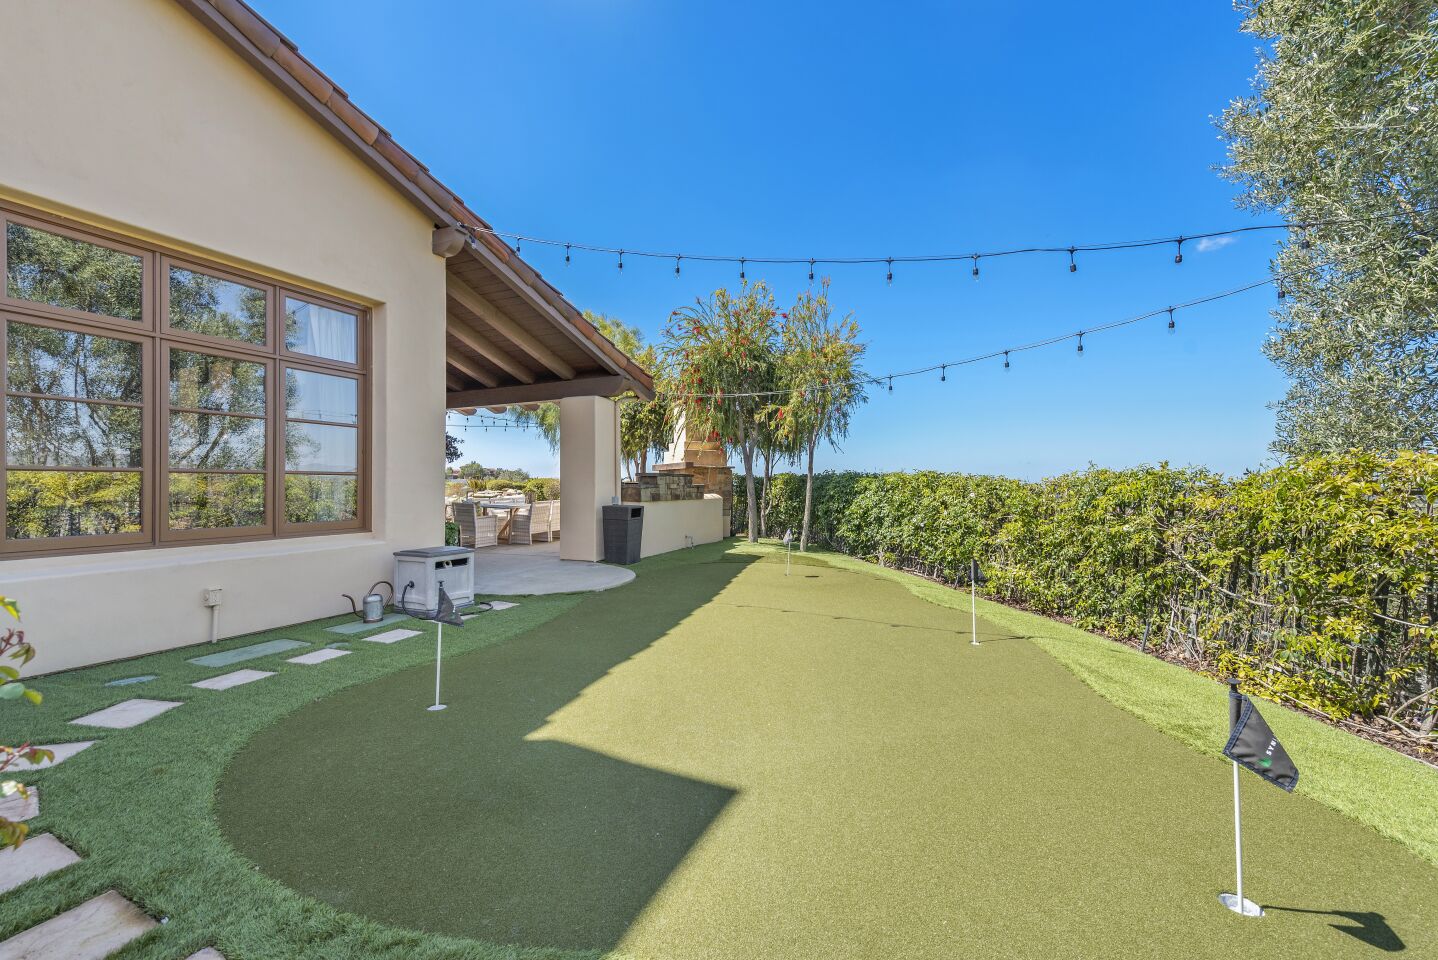 The house has a putting green.